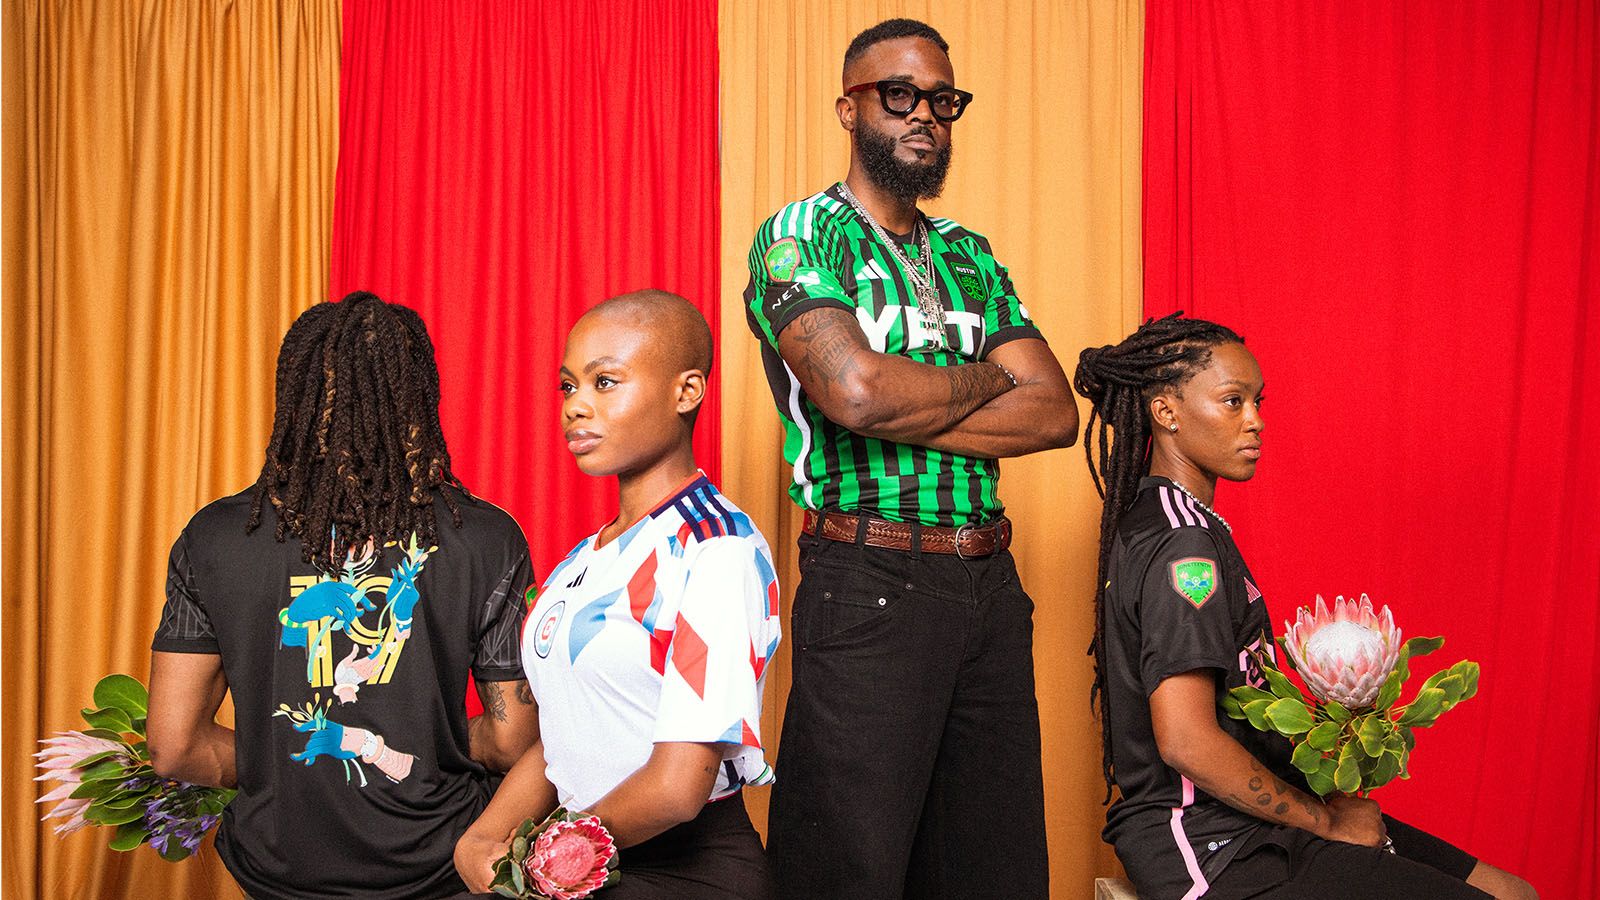 Textile arts meet Futurism On making unique Juneteenth soccer jerseys and creating an online auction for uplifting Black communities